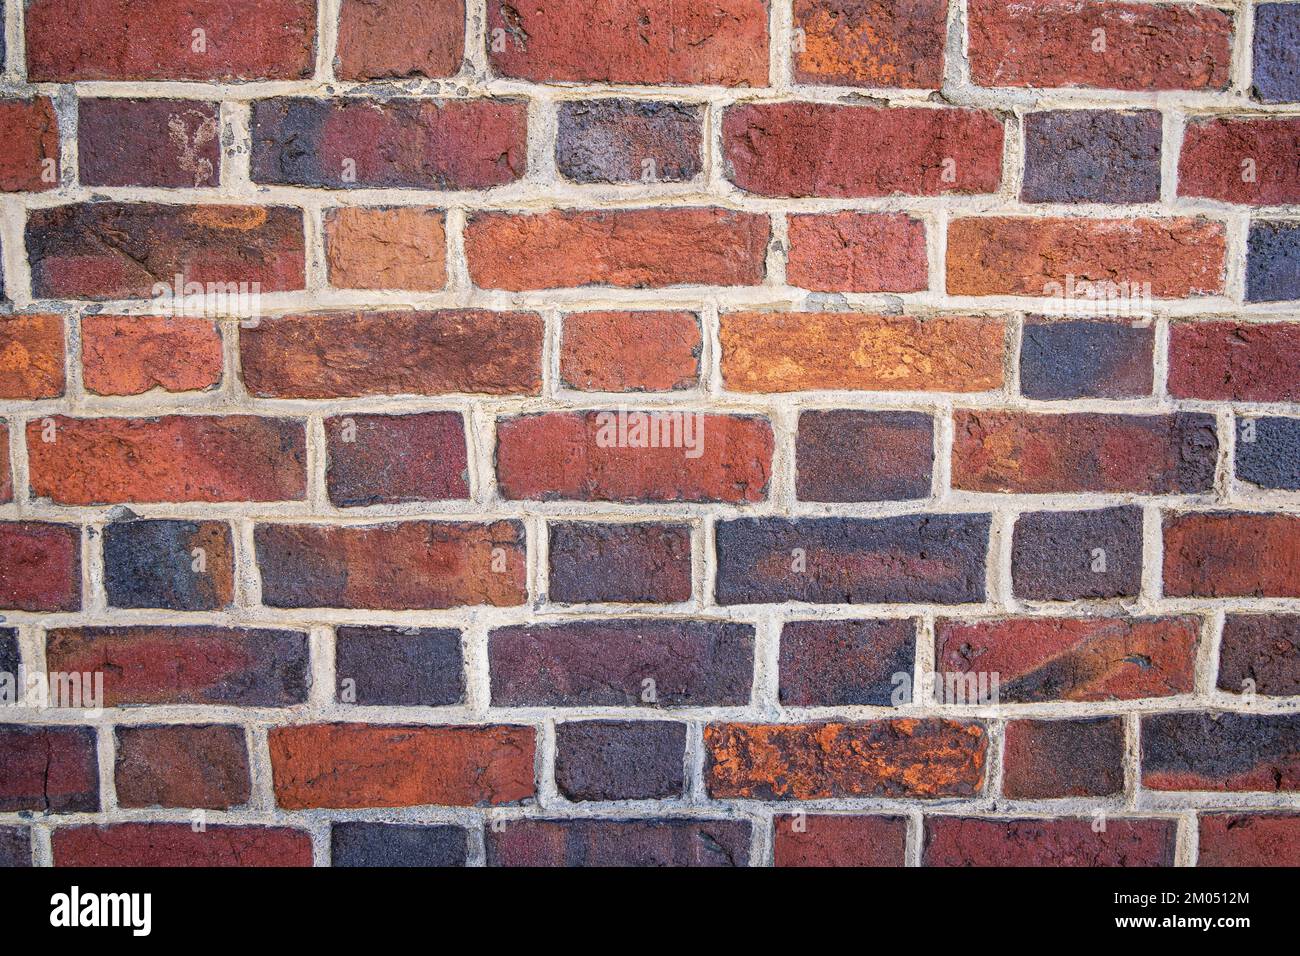 Old red and orange brick wall background texture close-up. Stock Photo